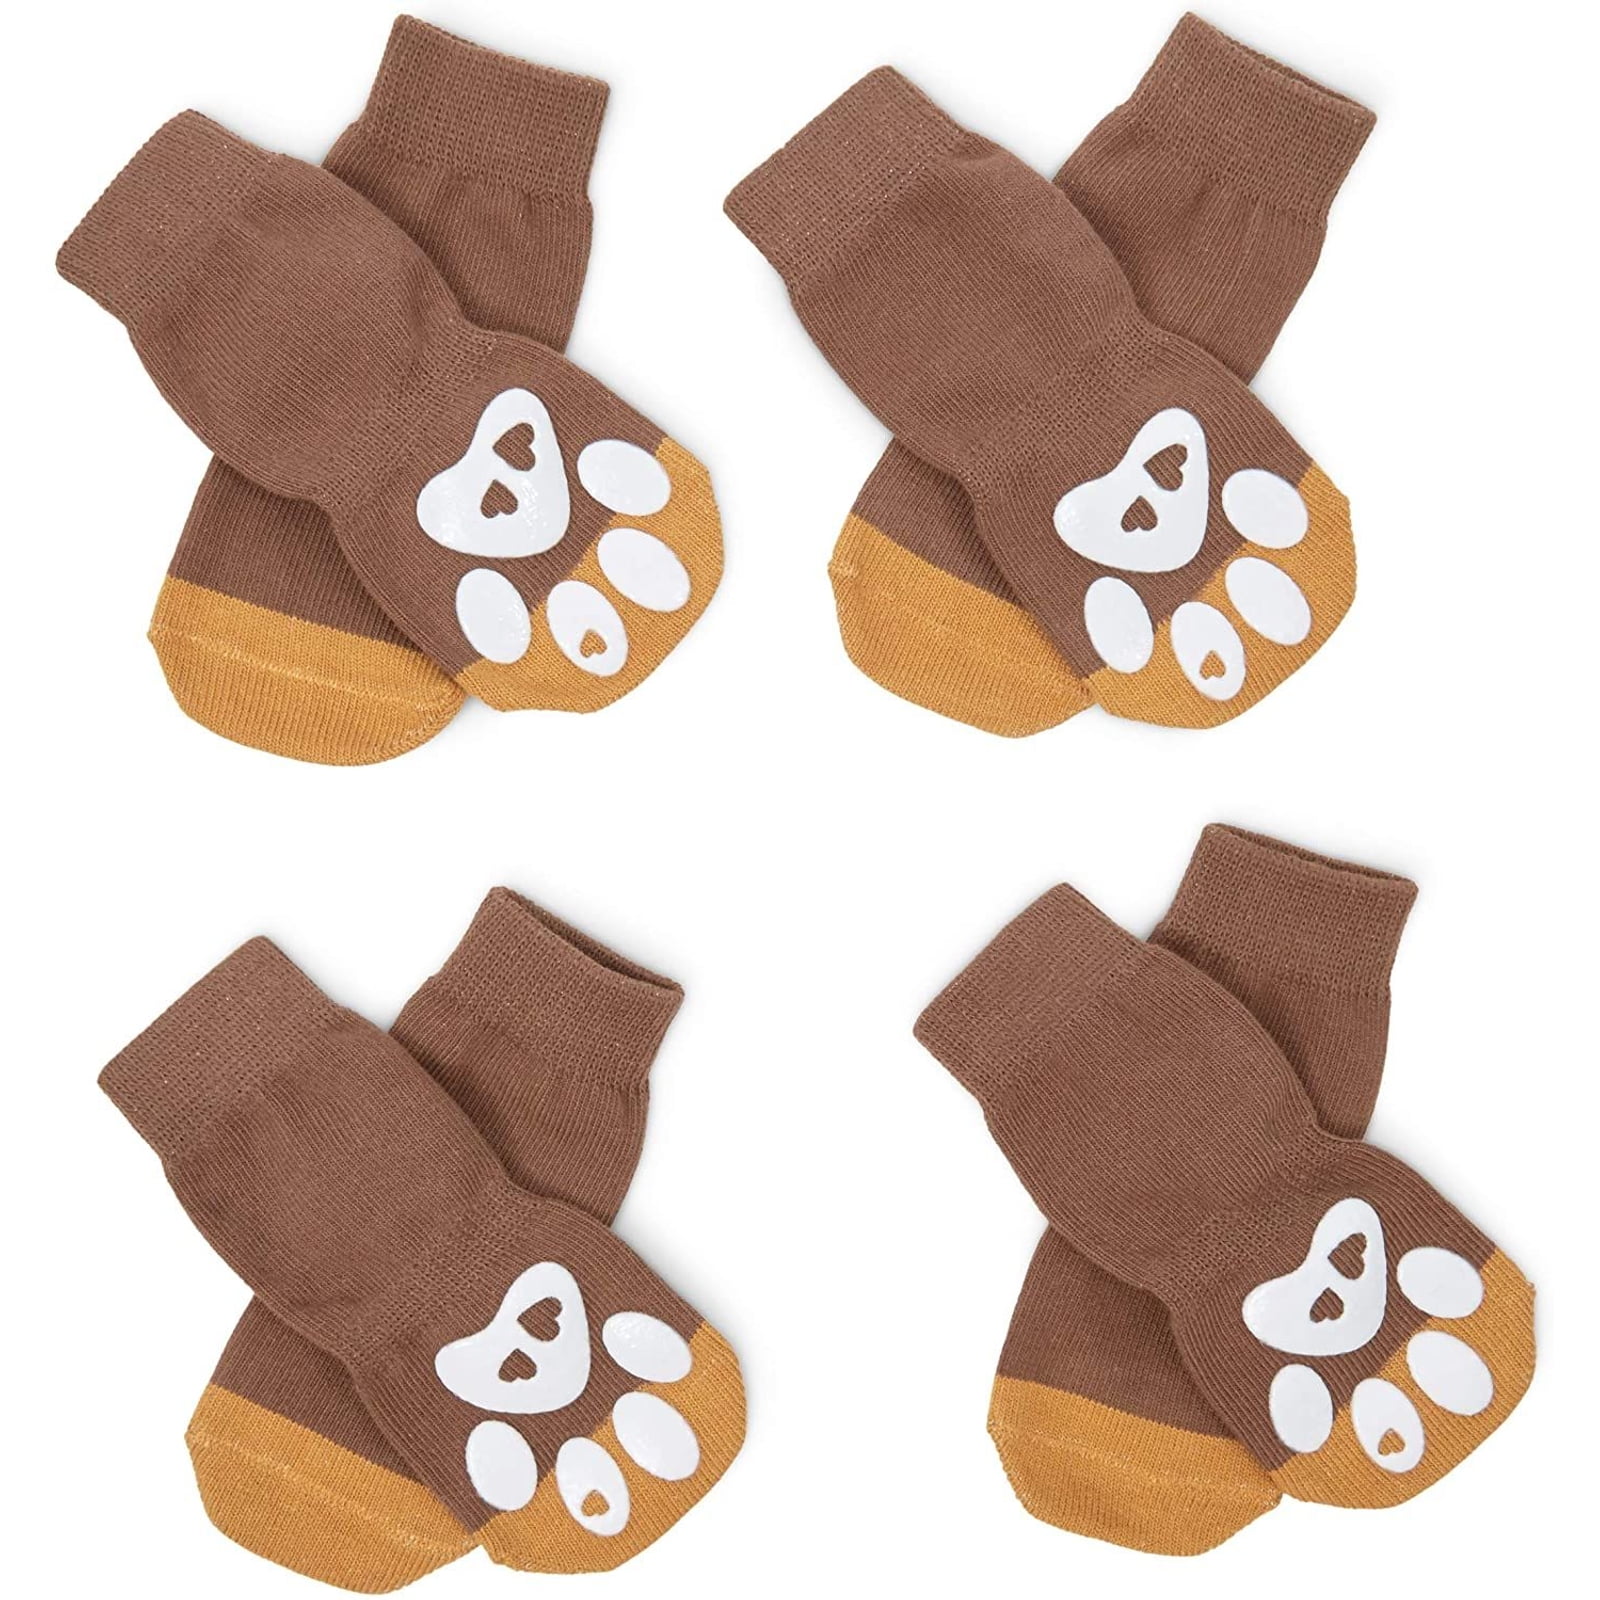 4 Pairs, 8 Pieces Total Small Dog Paw Socks for Hardwood Floors 